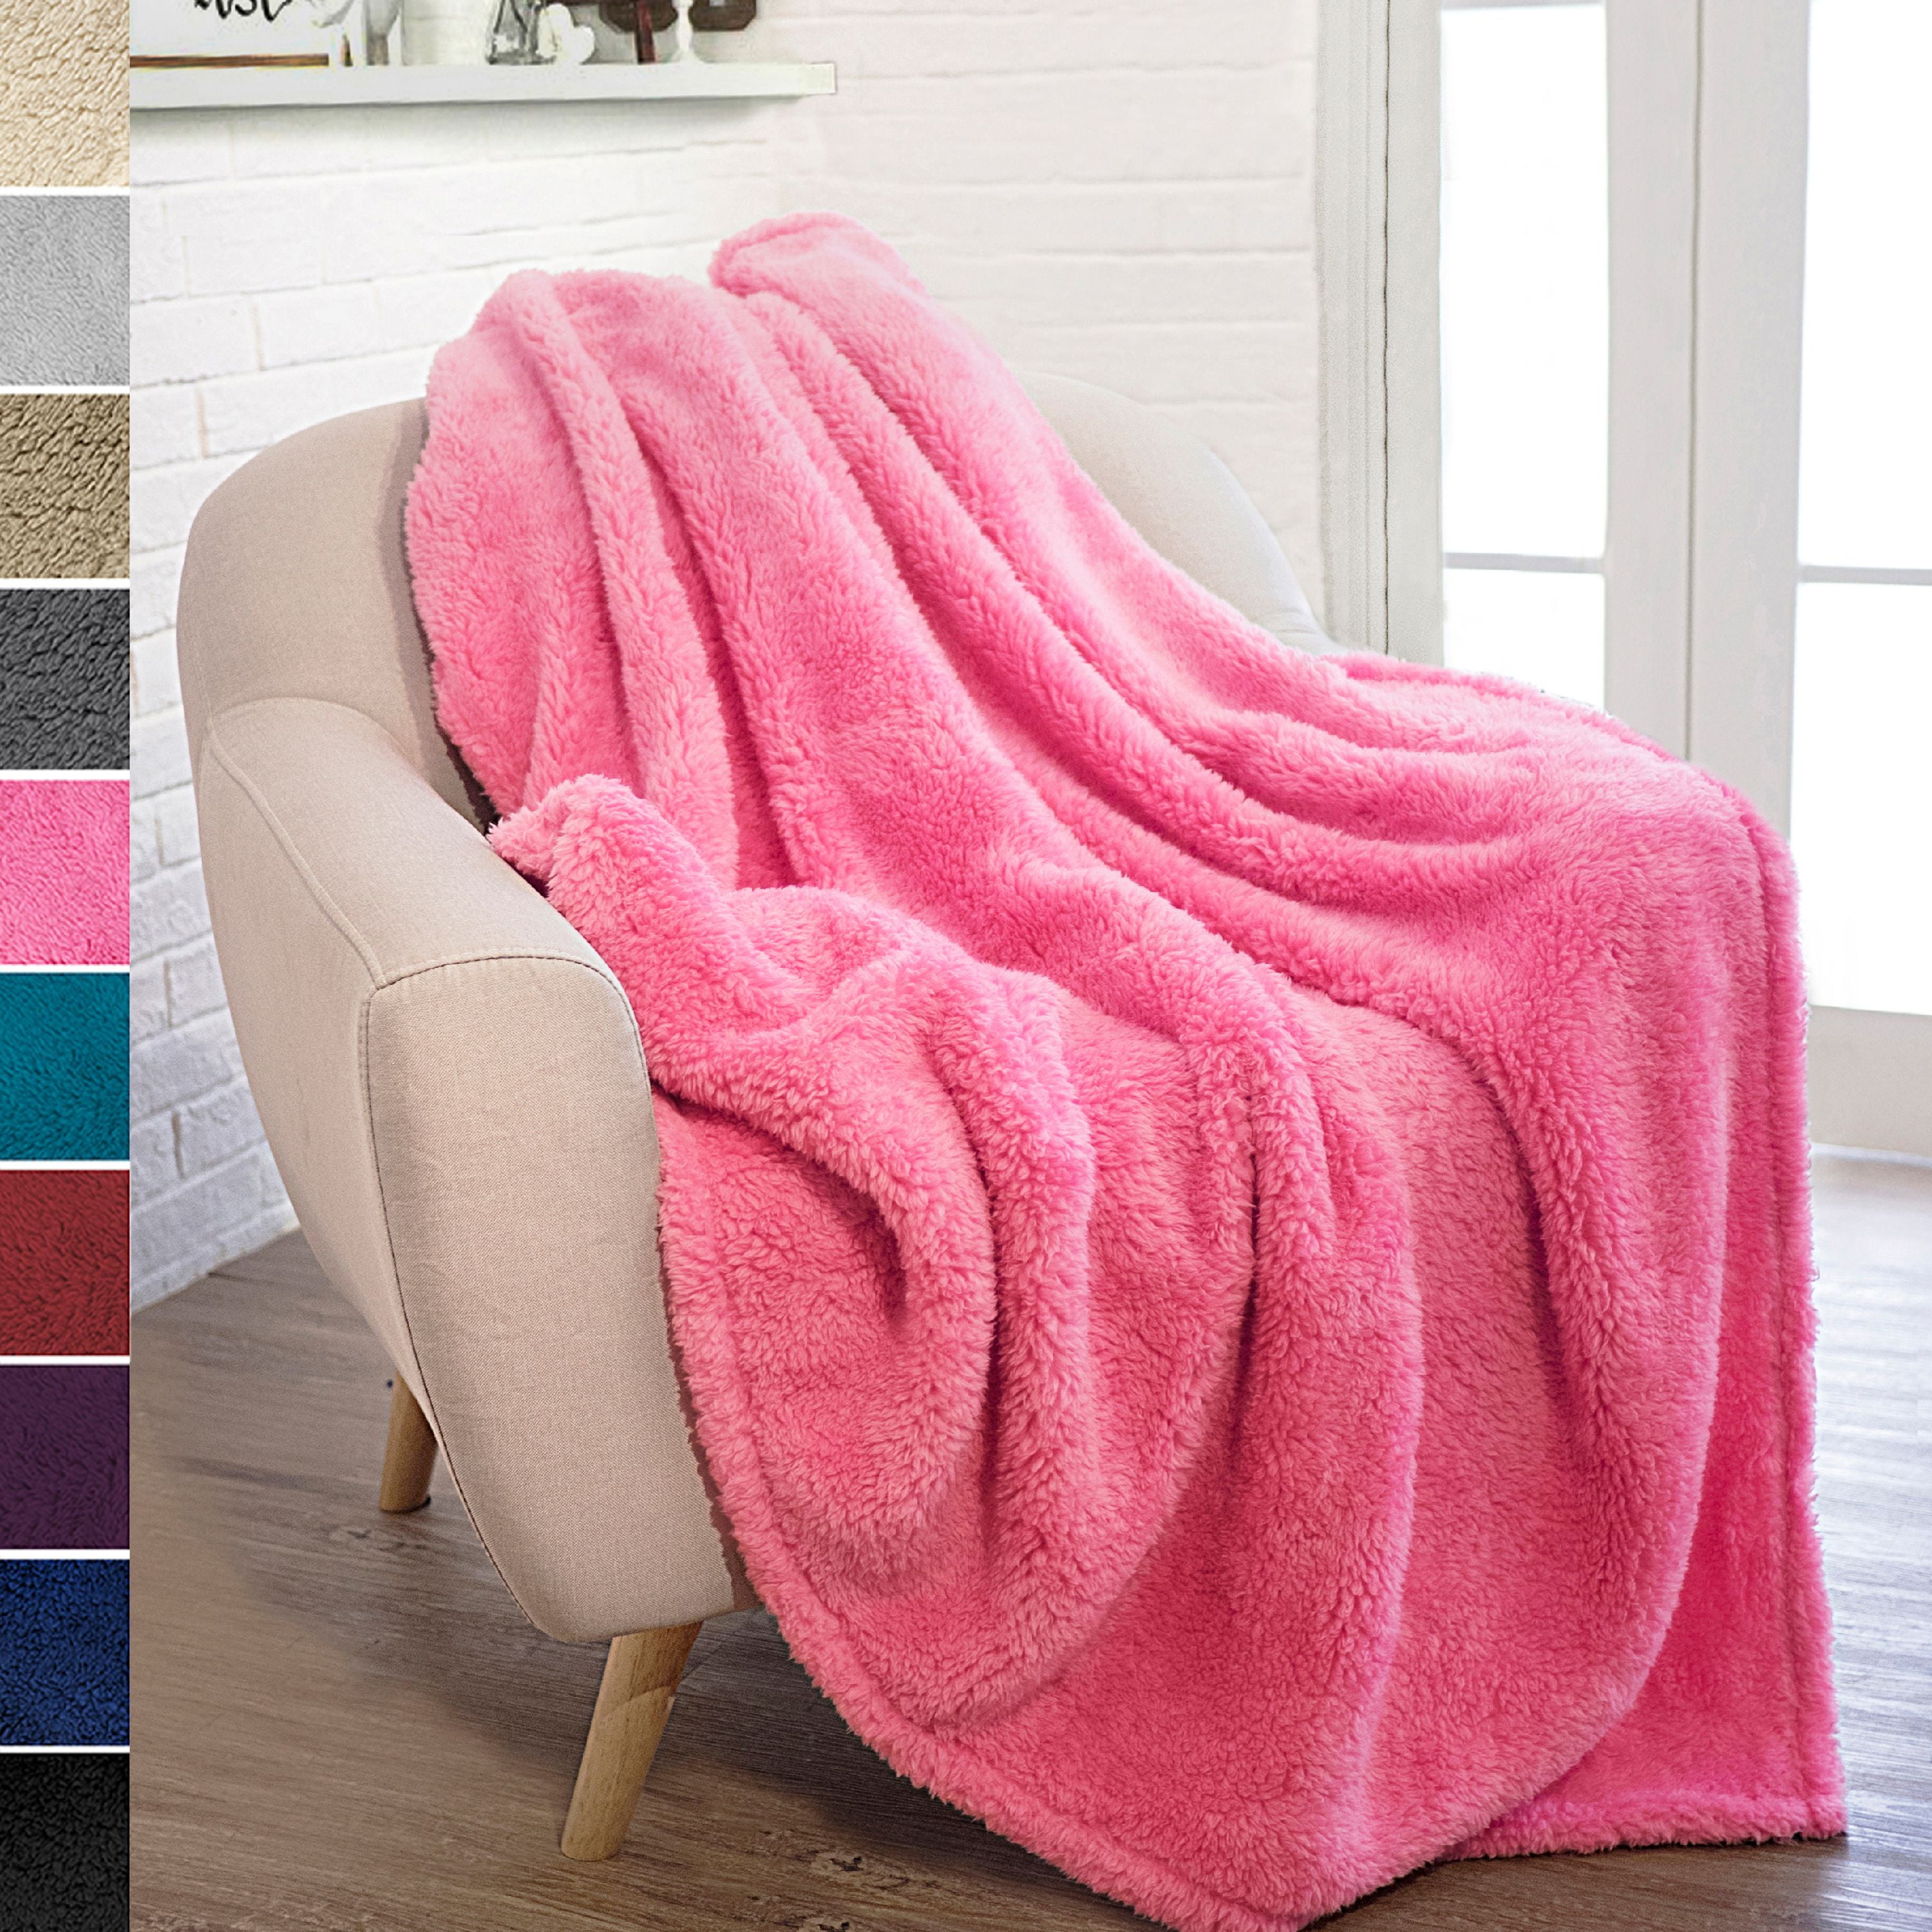 Soft & Cozy for Travel Blue Outdoors & Lounging on The Sofa or a Chair Gray & Pink Plush 60”x50” Blankets Set of 3 Lavish Home Fleece Throw Blanket 